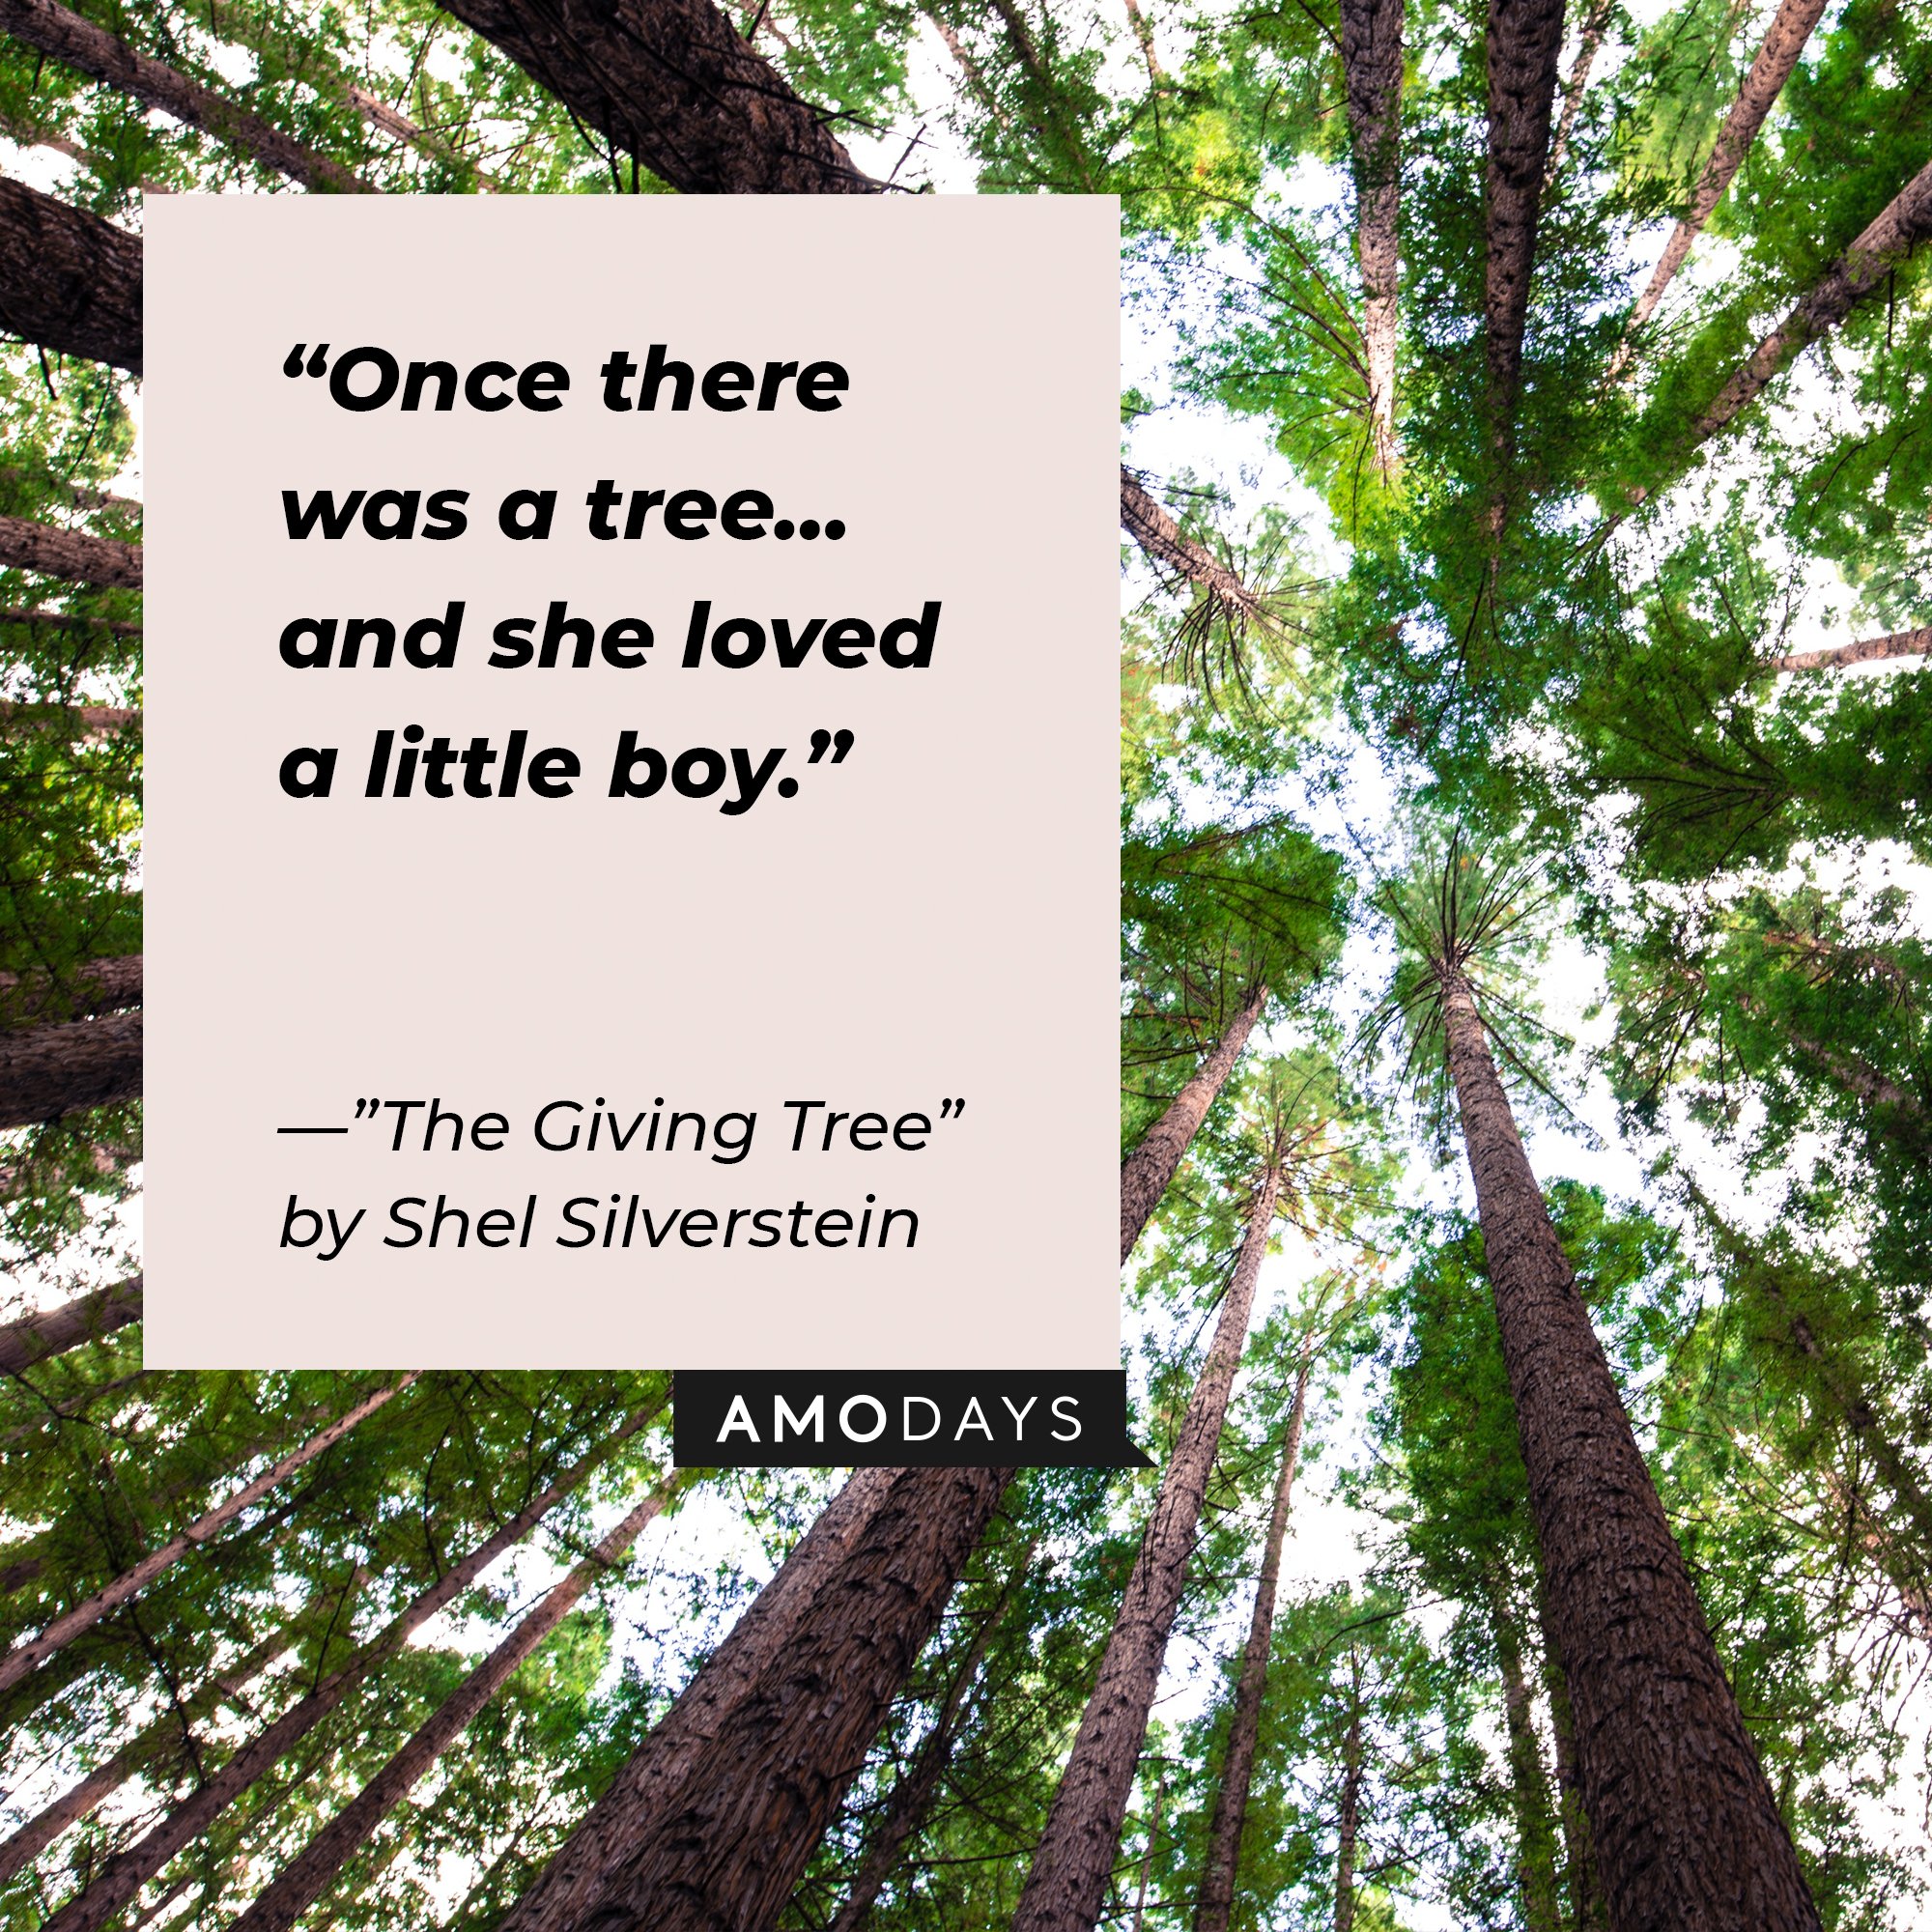 Quotes from Shel Silverstein’s "Giving Tree”: "Once there was a tree…and she loved a little boy." | Image: AmoDays